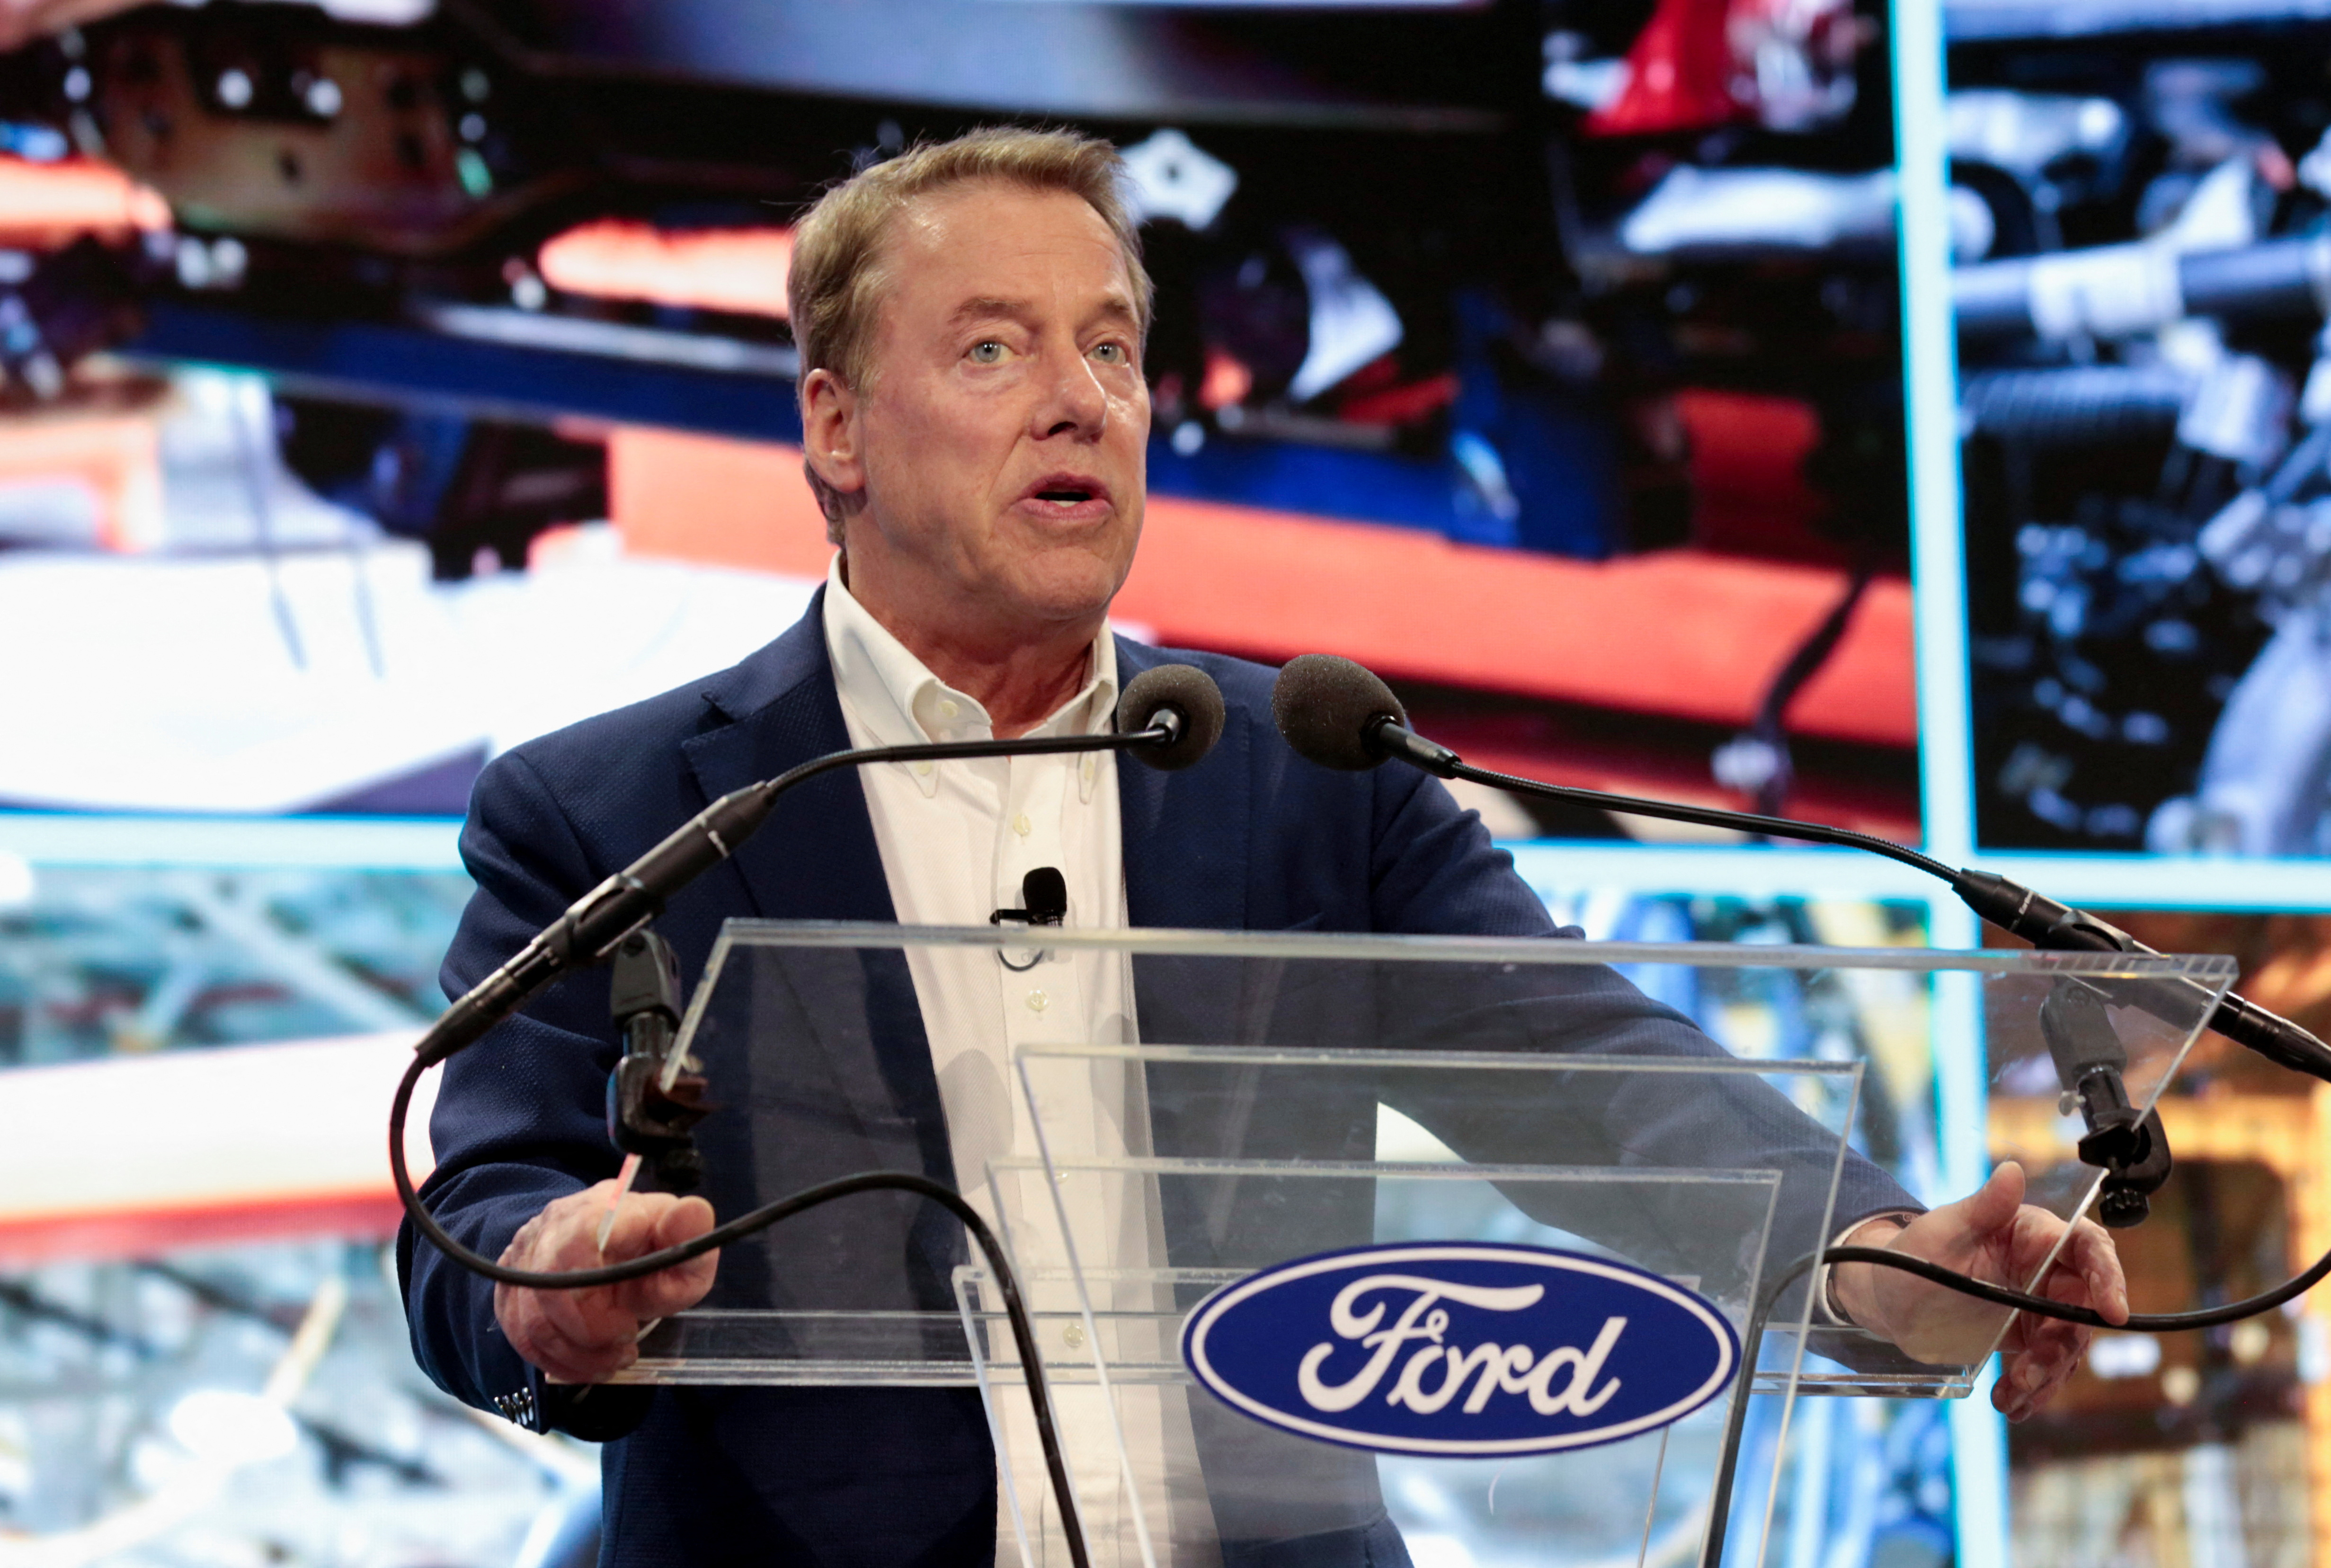 Ford Motor to build $3.5 billion electric vehicle battery plant in Michigan